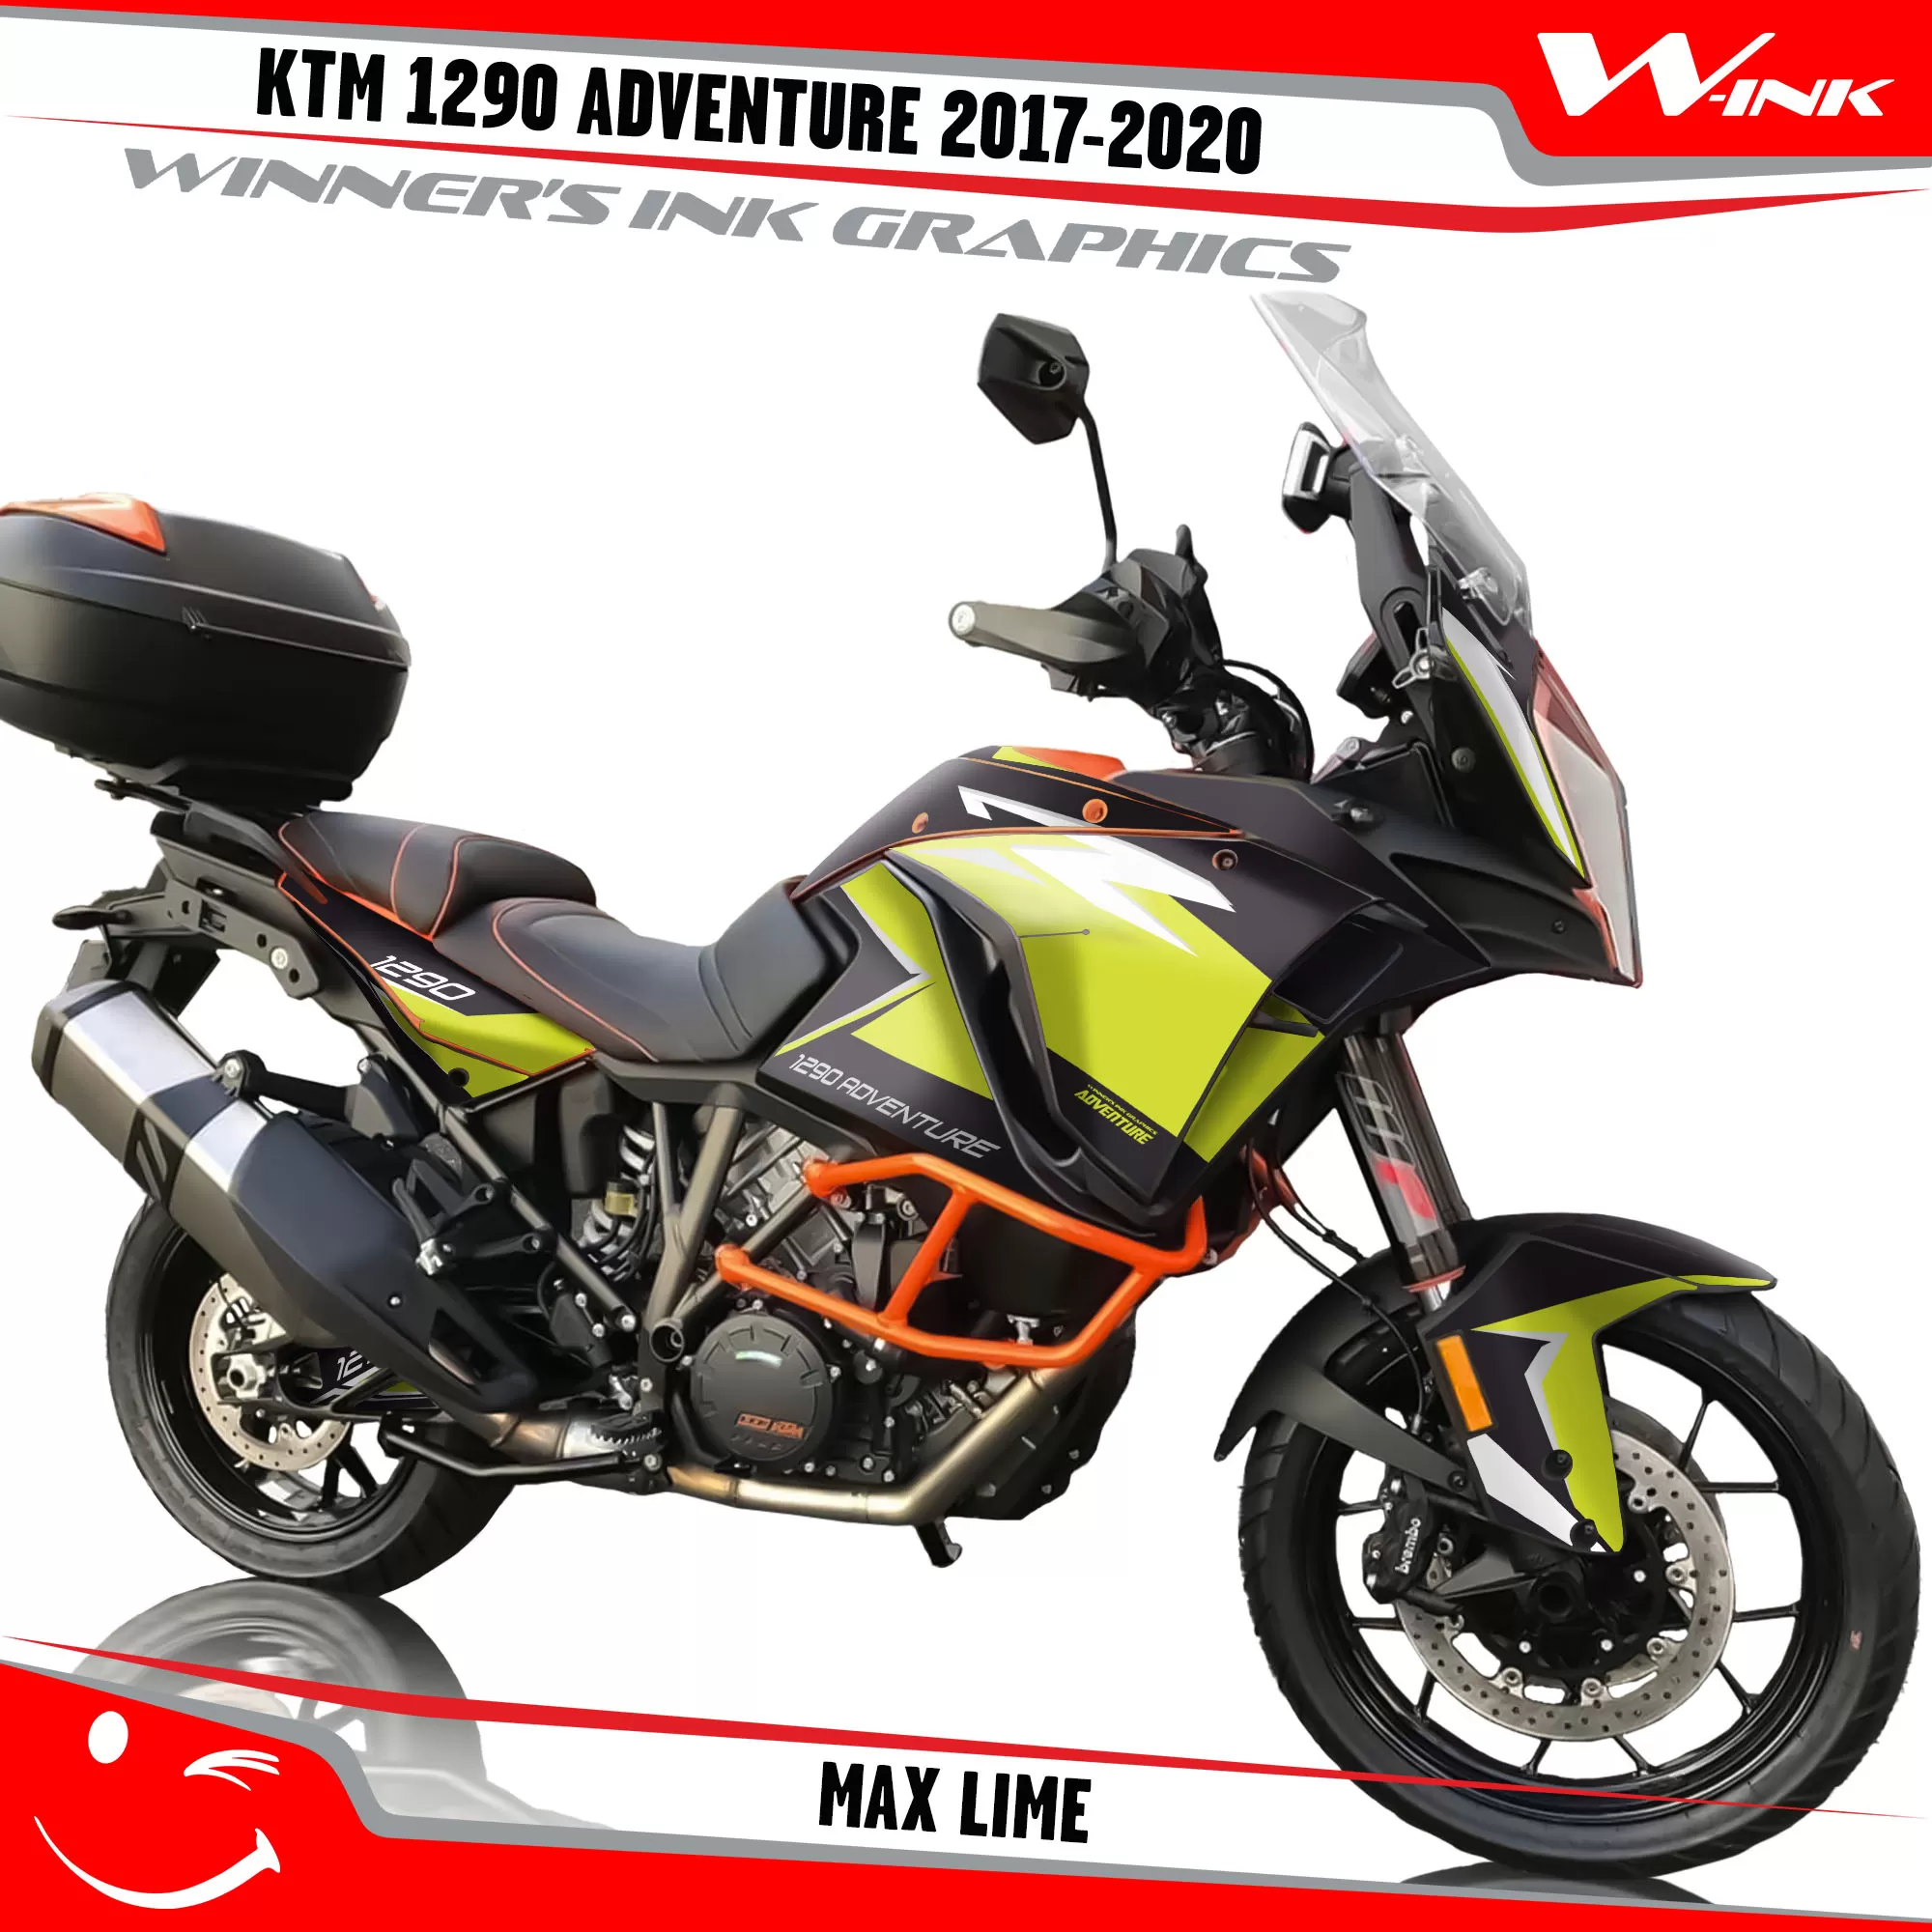 KTM-Adventure-1290-2017-2018-2019-2020-graphics-kit-and-decals-Max-Lime